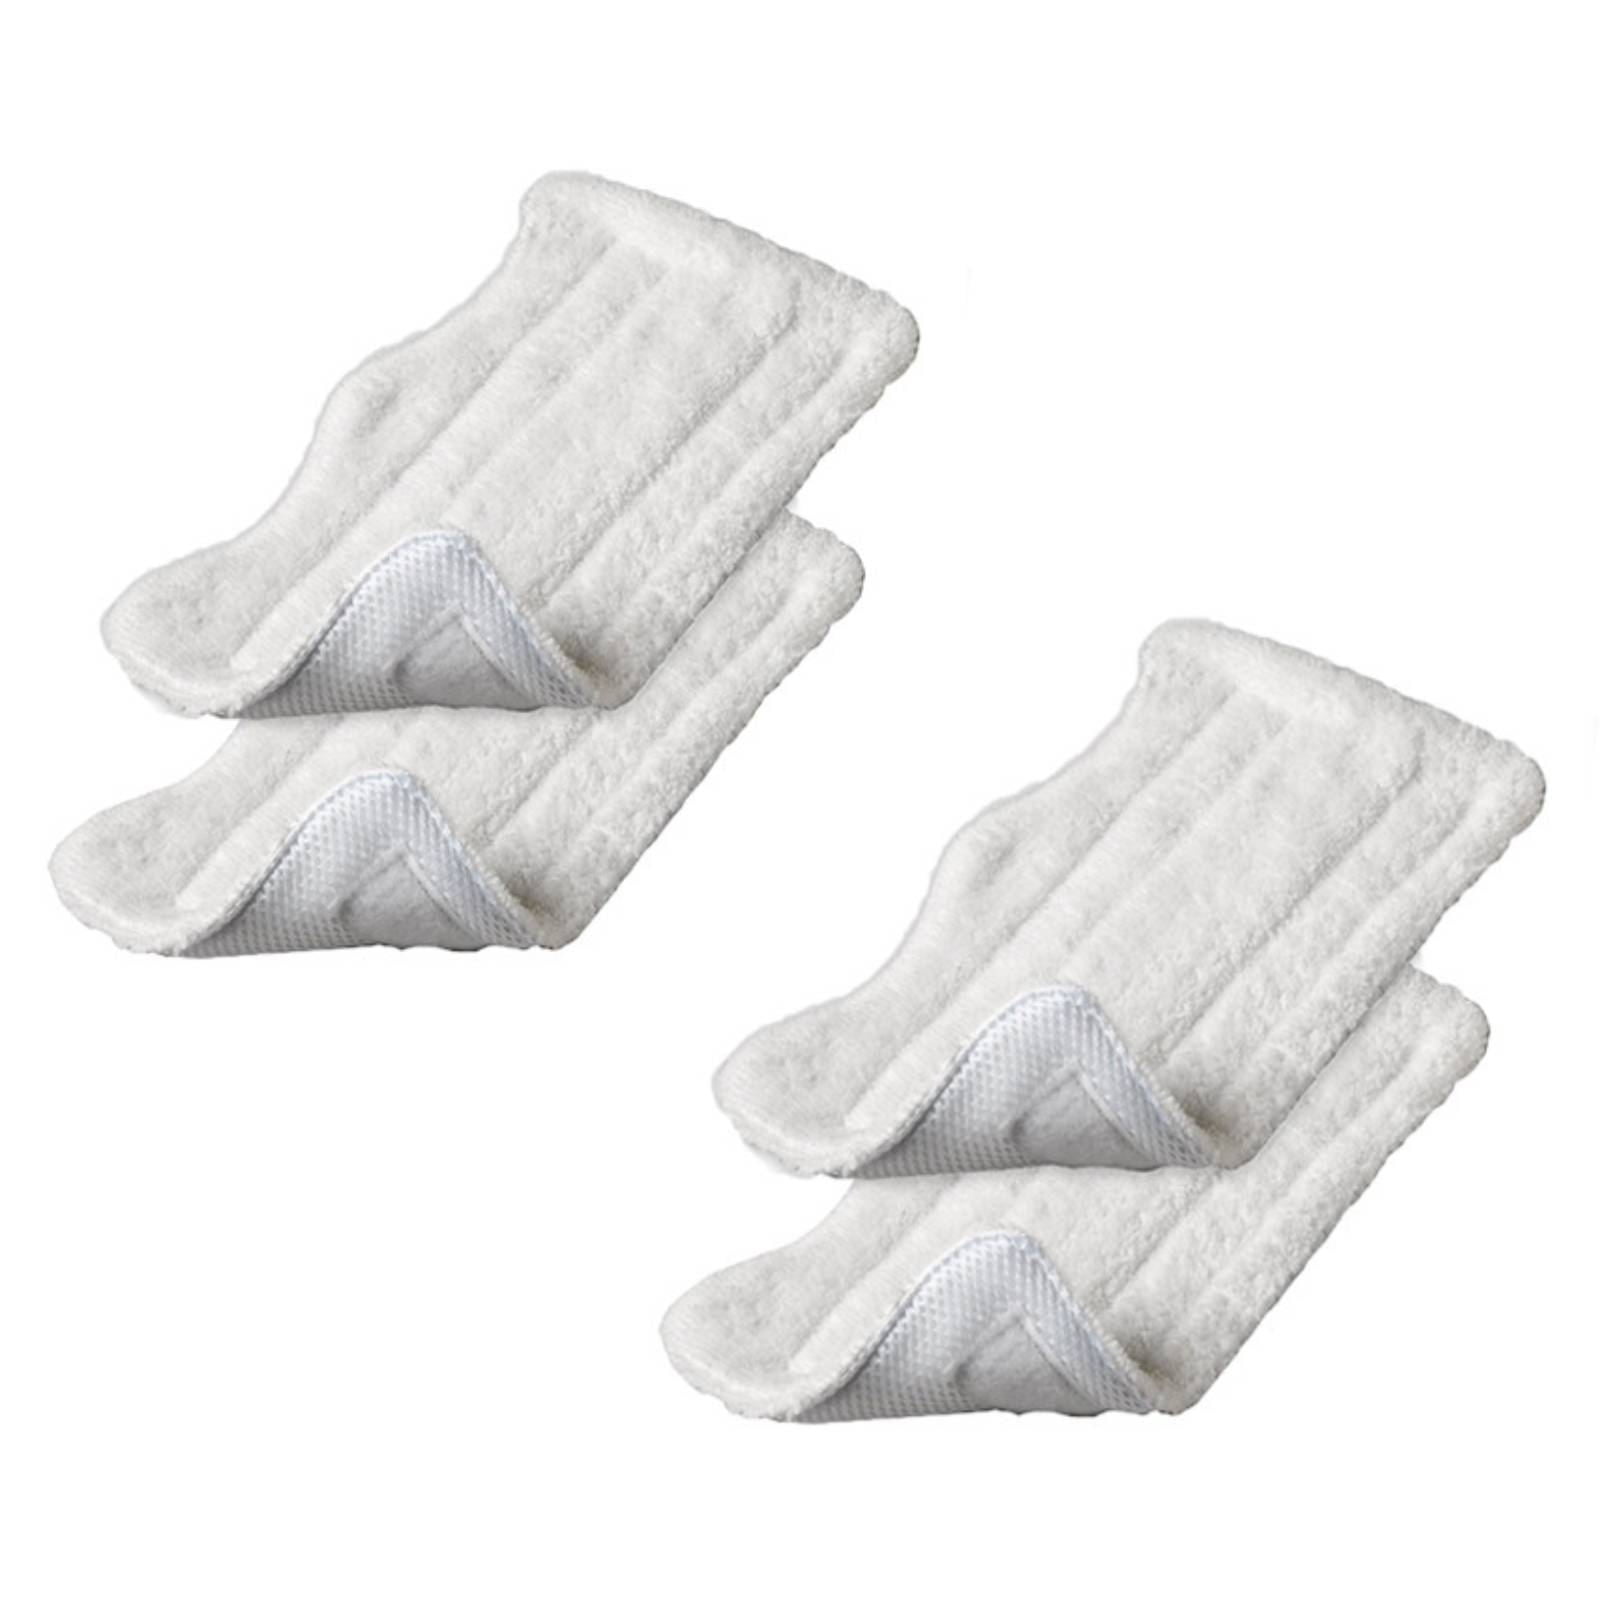 Microfiber Replacement Pads for Shark Steam Euro-Pro Mop 6 PCS 